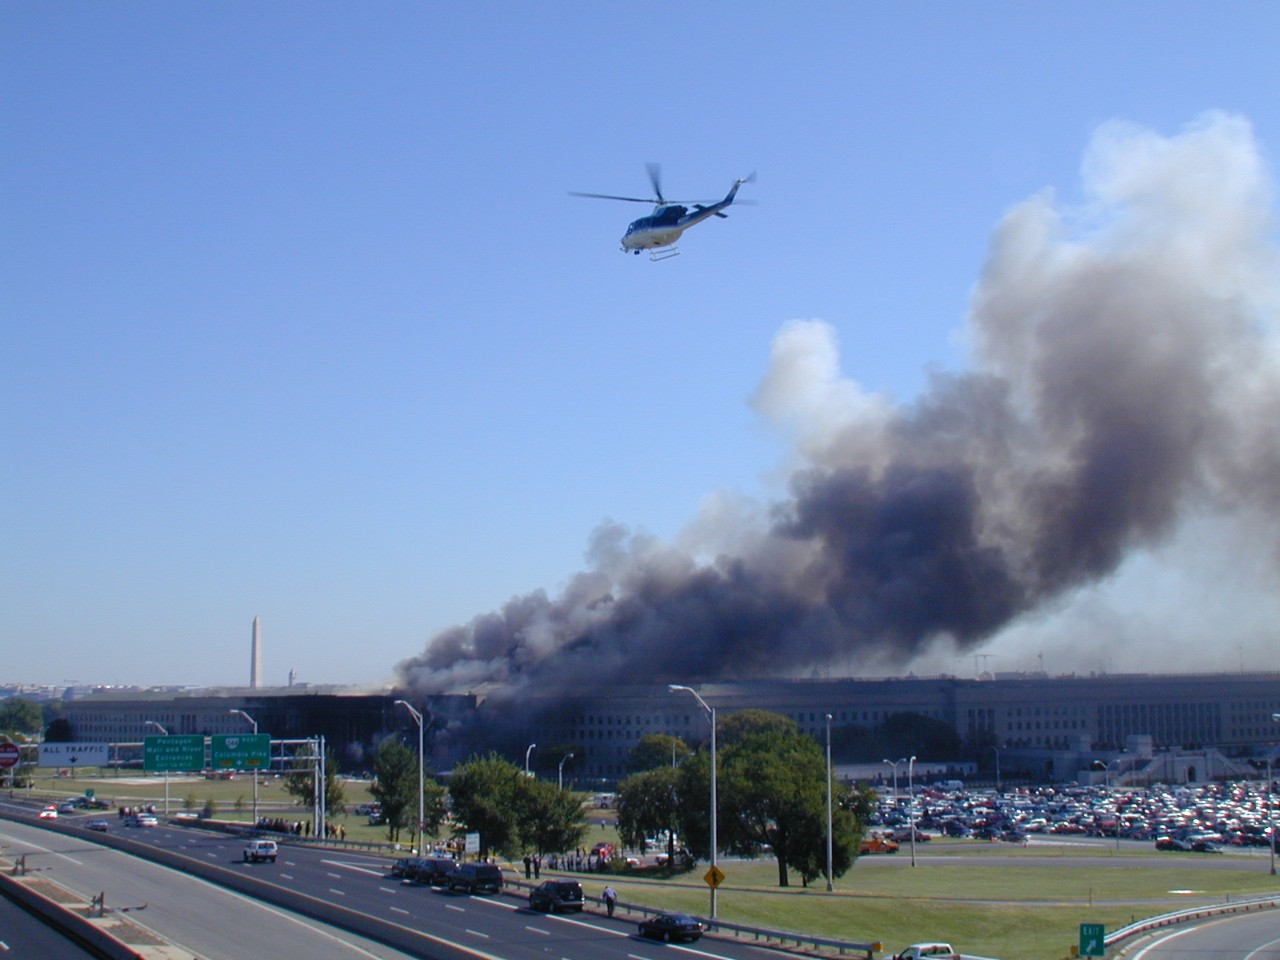 A United States Park Police helicopter provides medical transport on the day of the attack, 11 September 2001